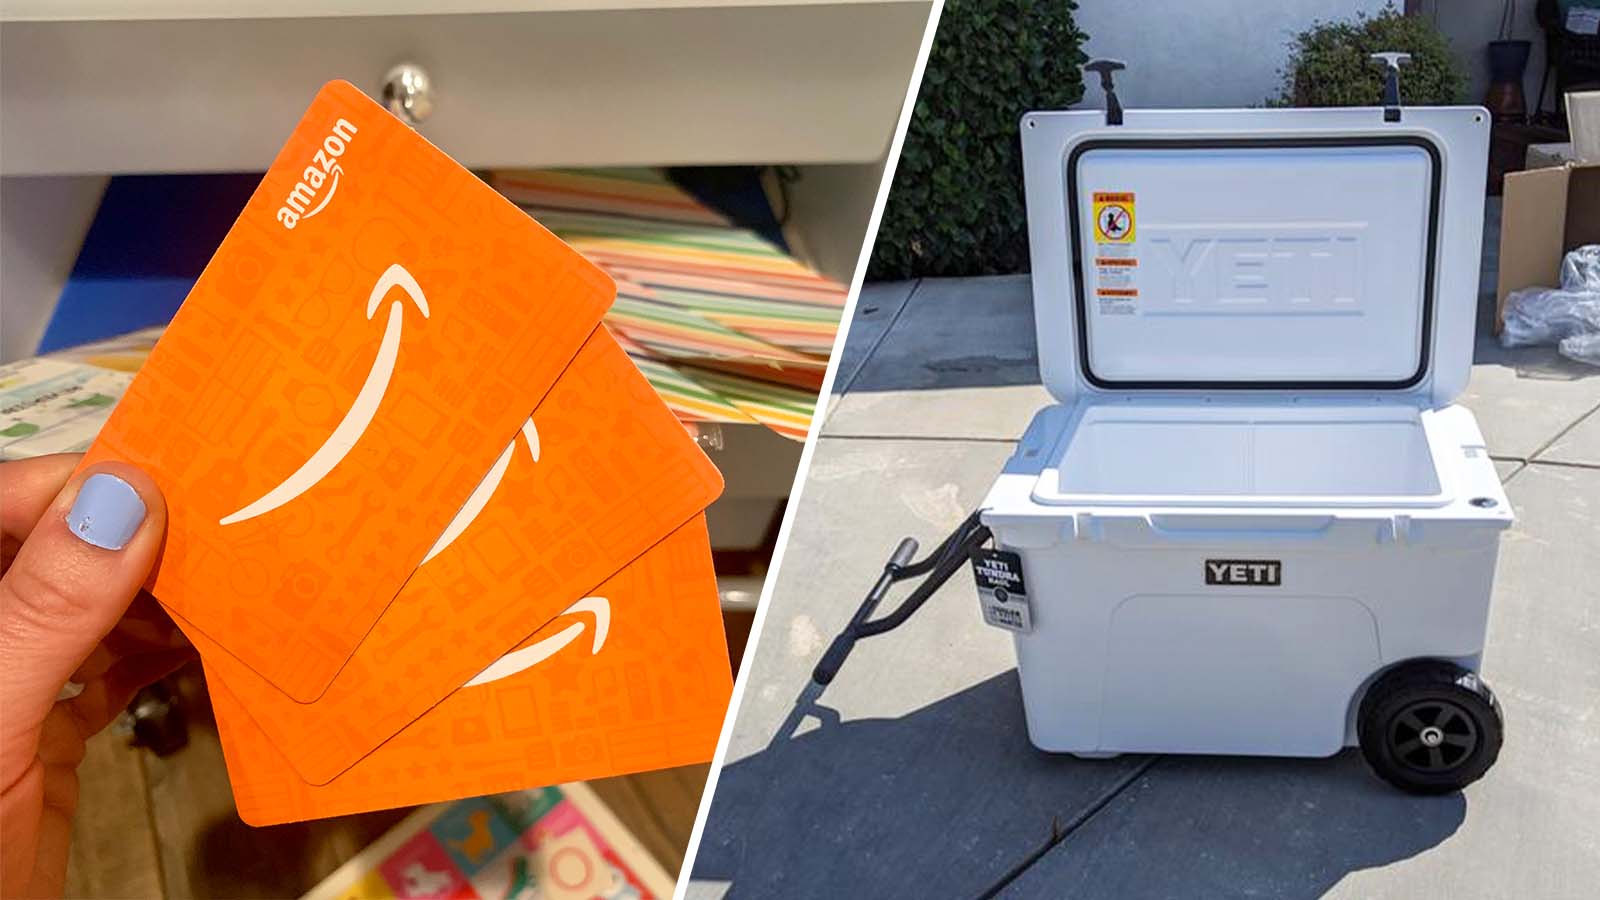 Summer giveaway to win a Yeti and Amazon gift car.